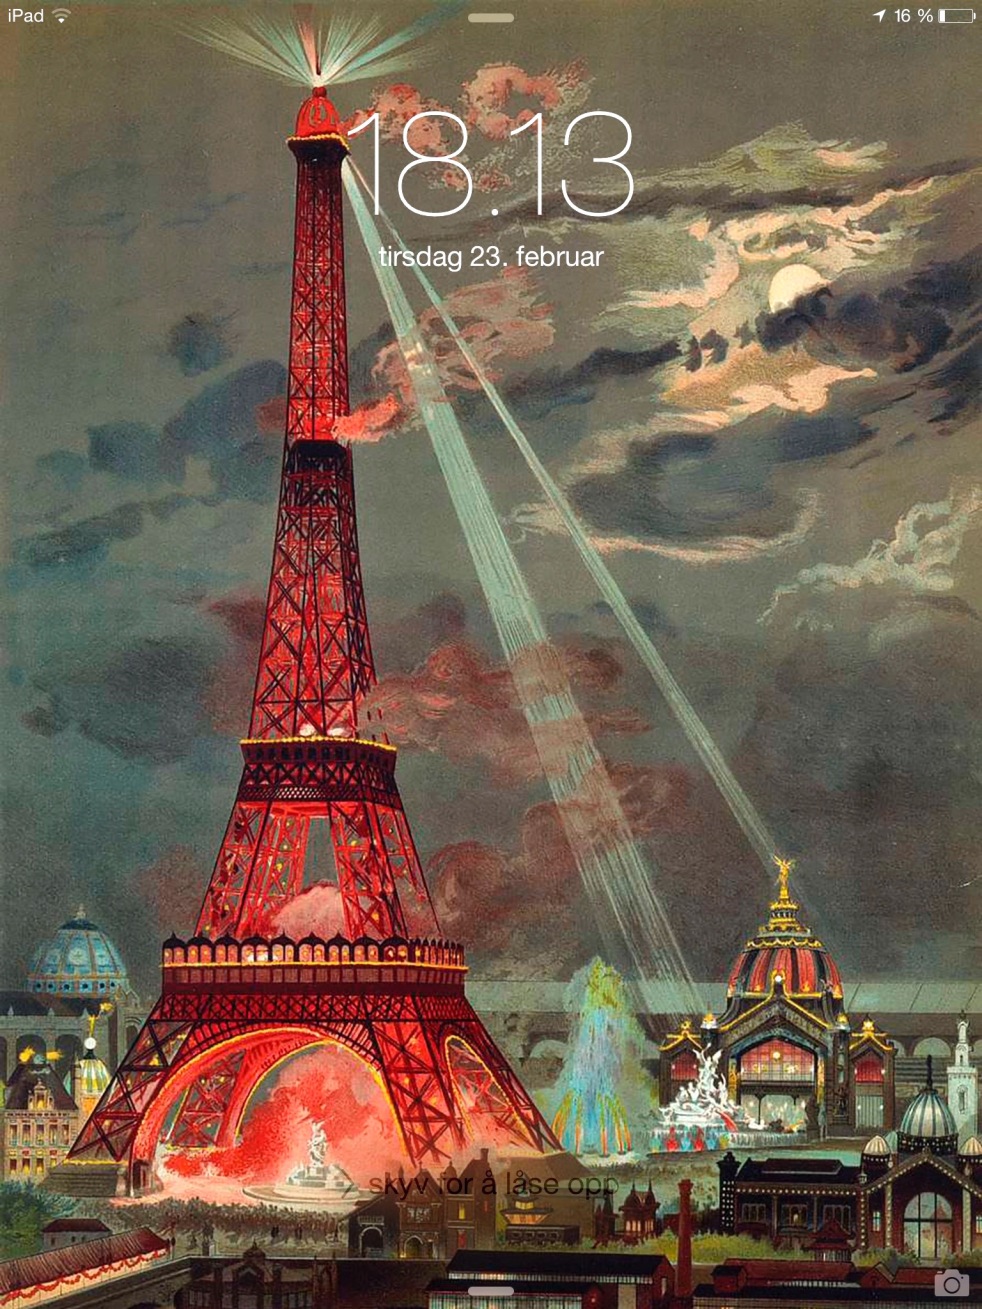 1899 Eiffel Tower Wallpaper – Wings of Whimsy